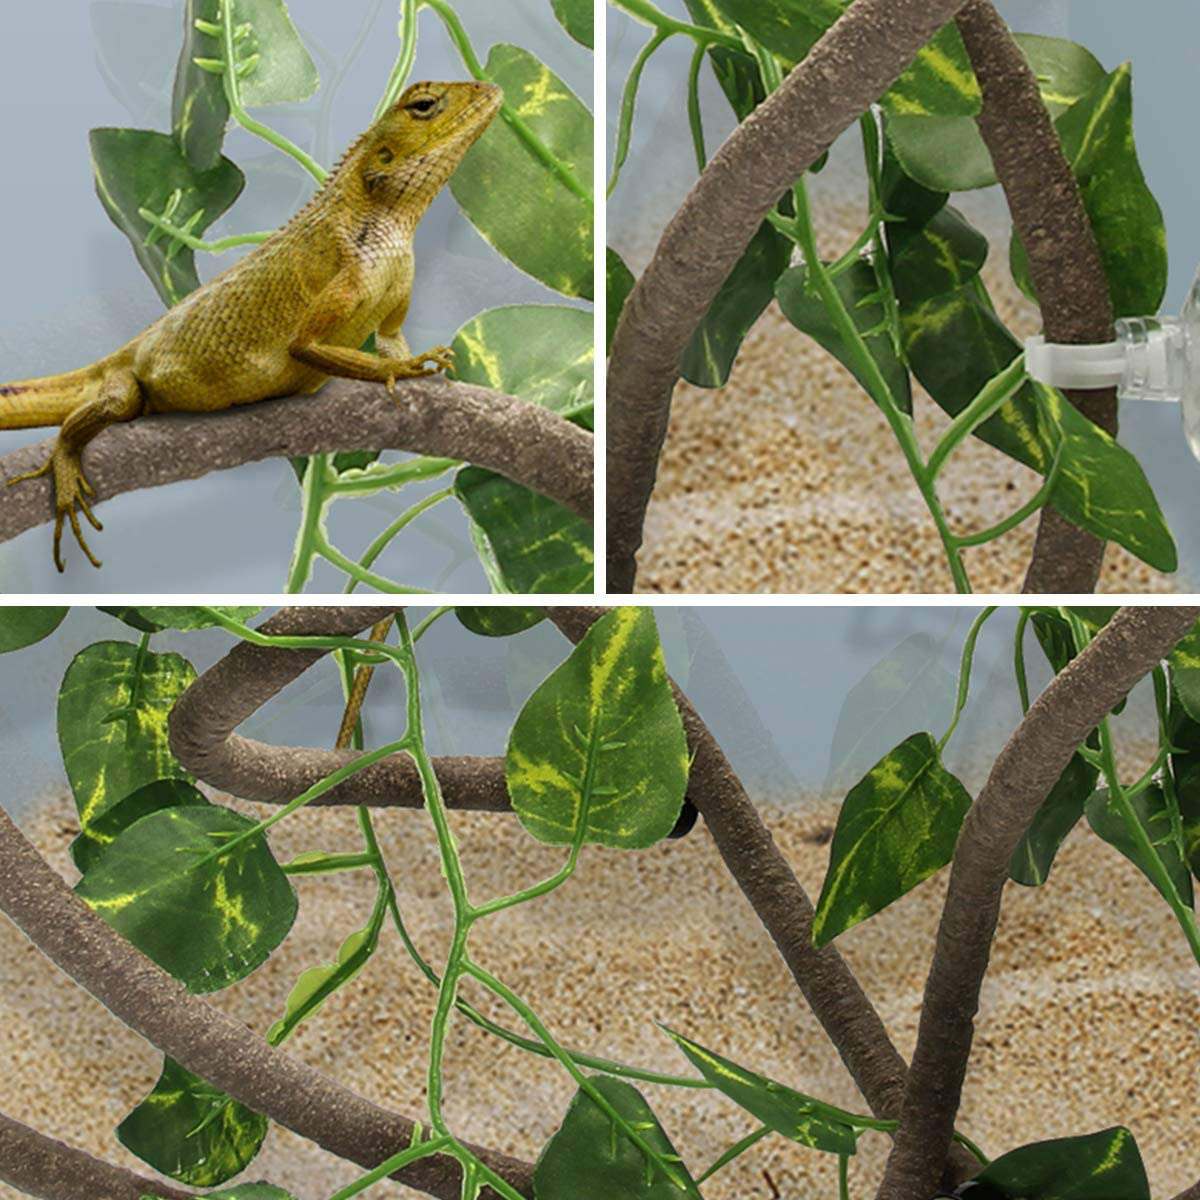 Coolrunner 8FT Reptile Vines and Flexible Reptile Leaves with Suction Cups Jungle Climber Long Vines Habitat Decor for Climbing, Chameleon, Lizards, Gecko Animals & Pet Supplies > Pet Supplies > Reptile & Amphibian Supplies > Reptile & Amphibian Habitat Accessories Coolrunner   